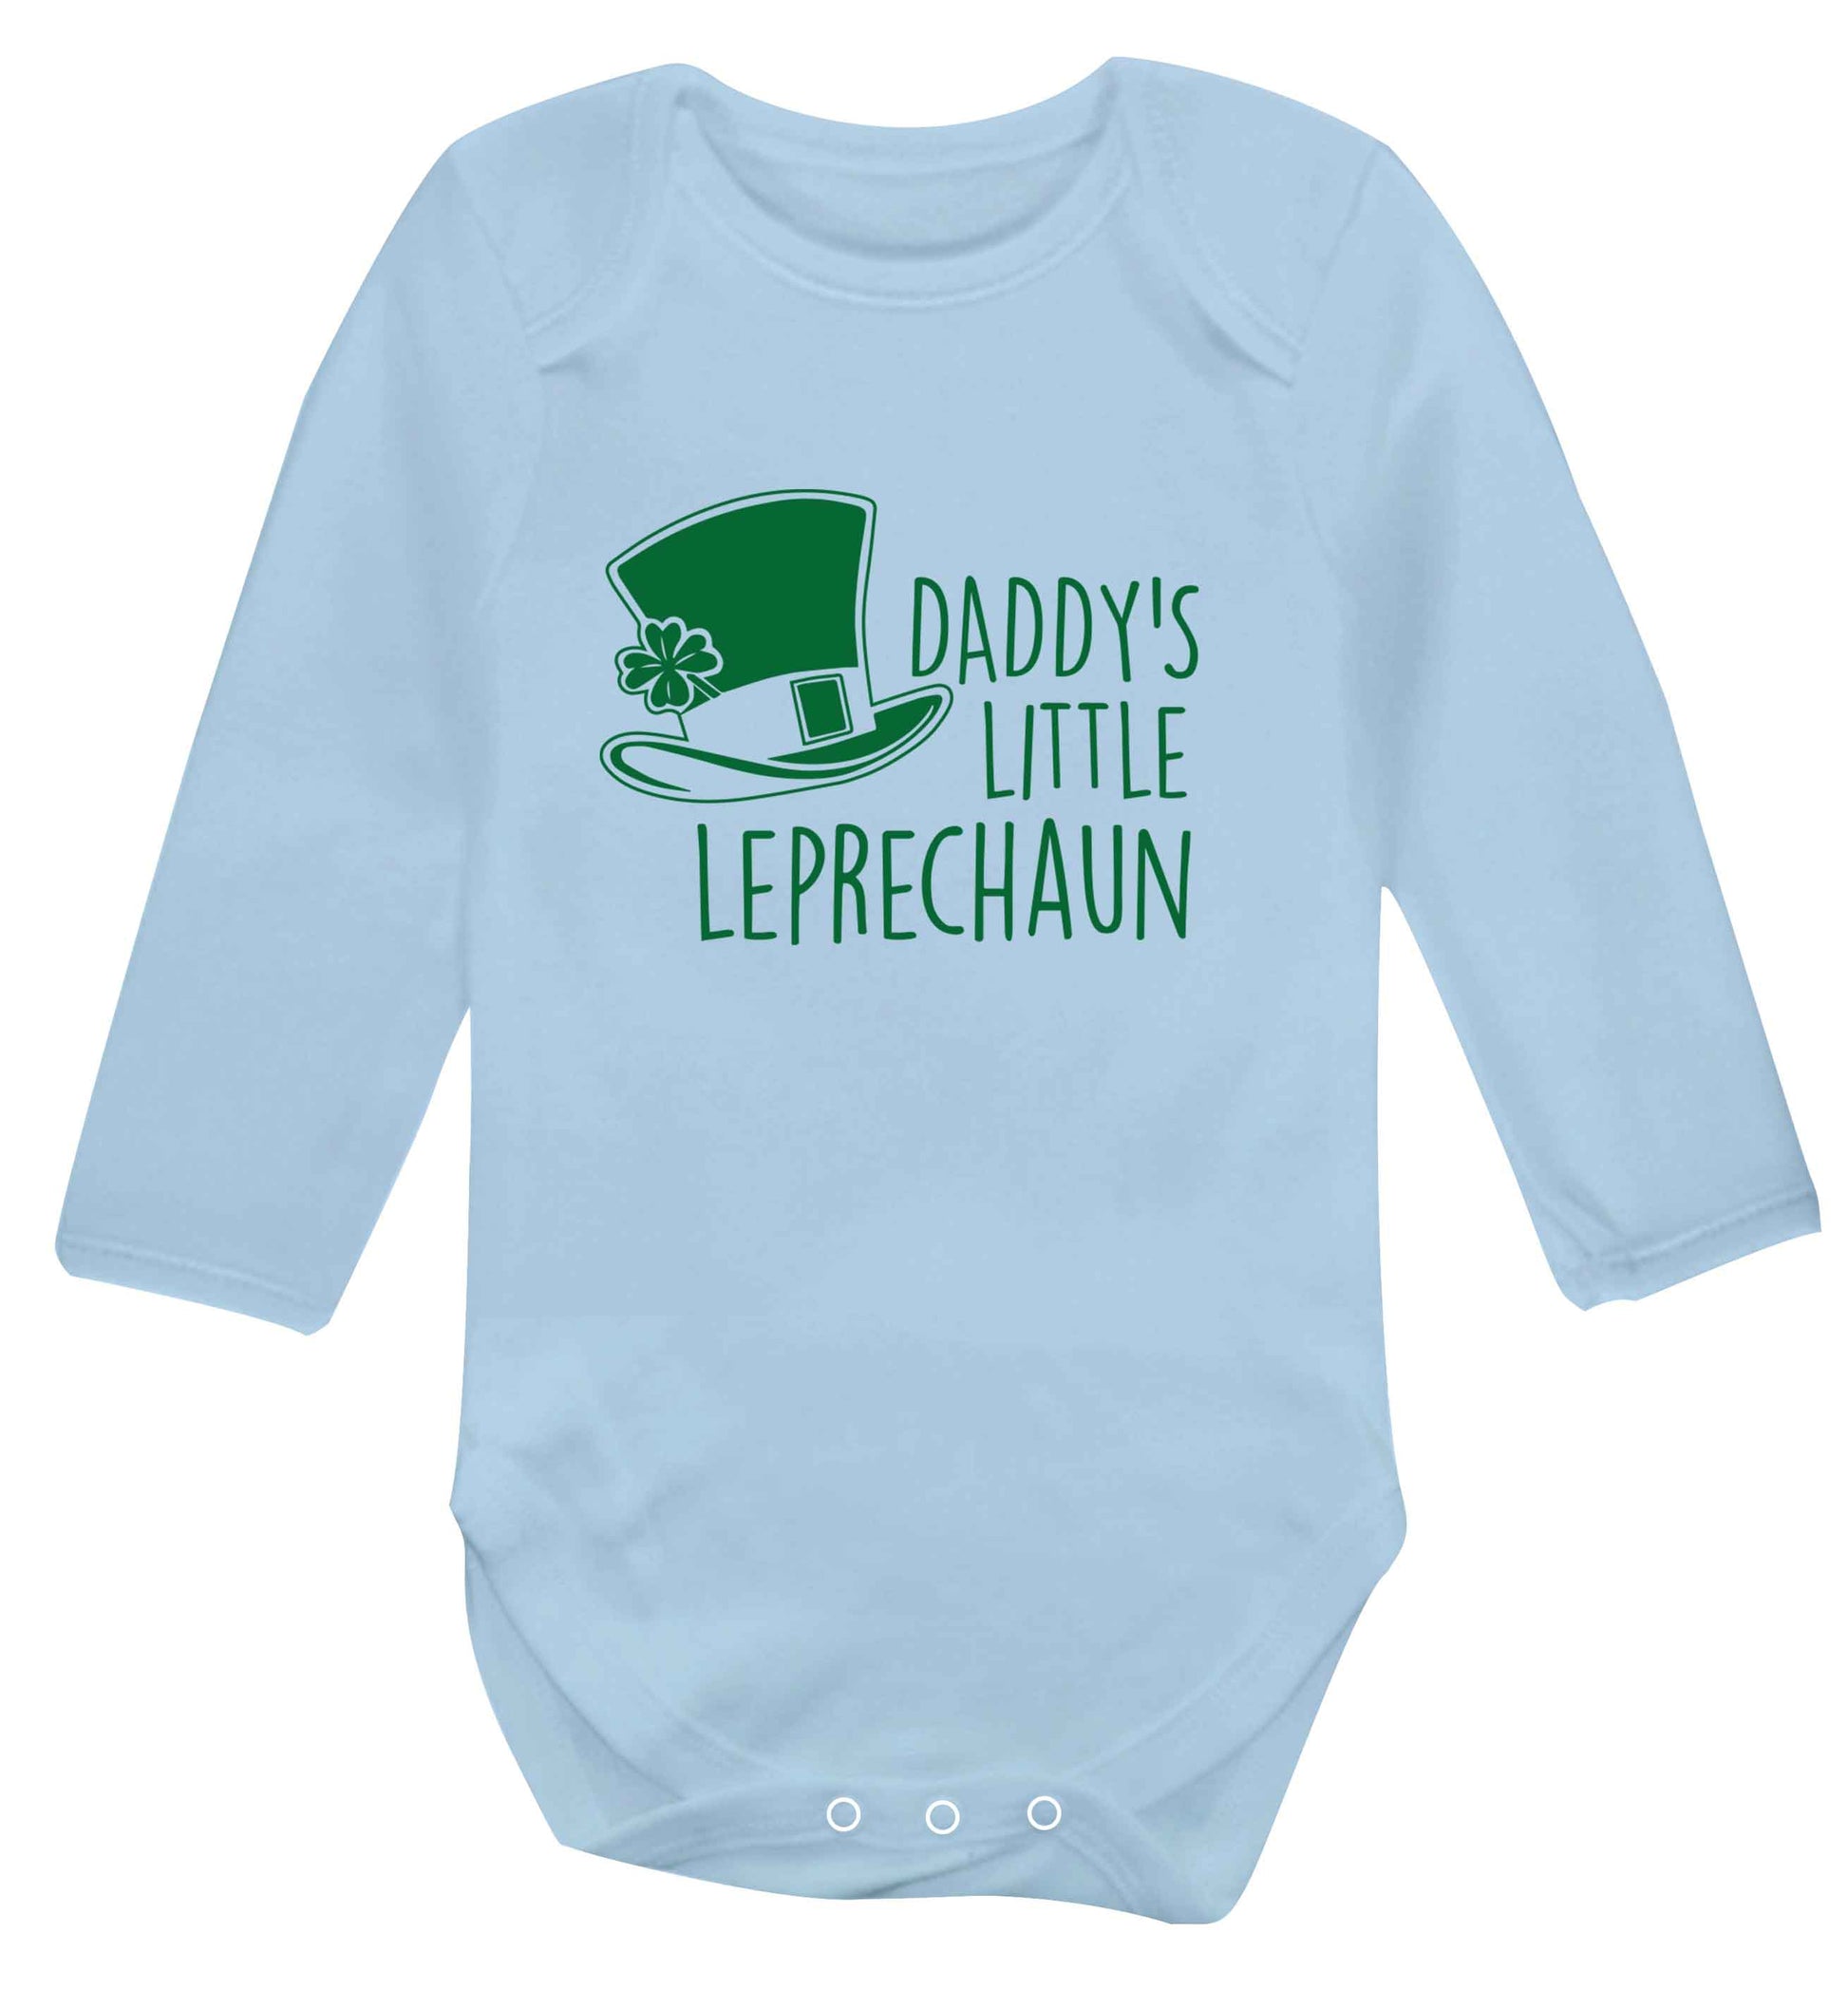 Daddy's lucky charm baby vest long sleeved pale blue 6-12 months